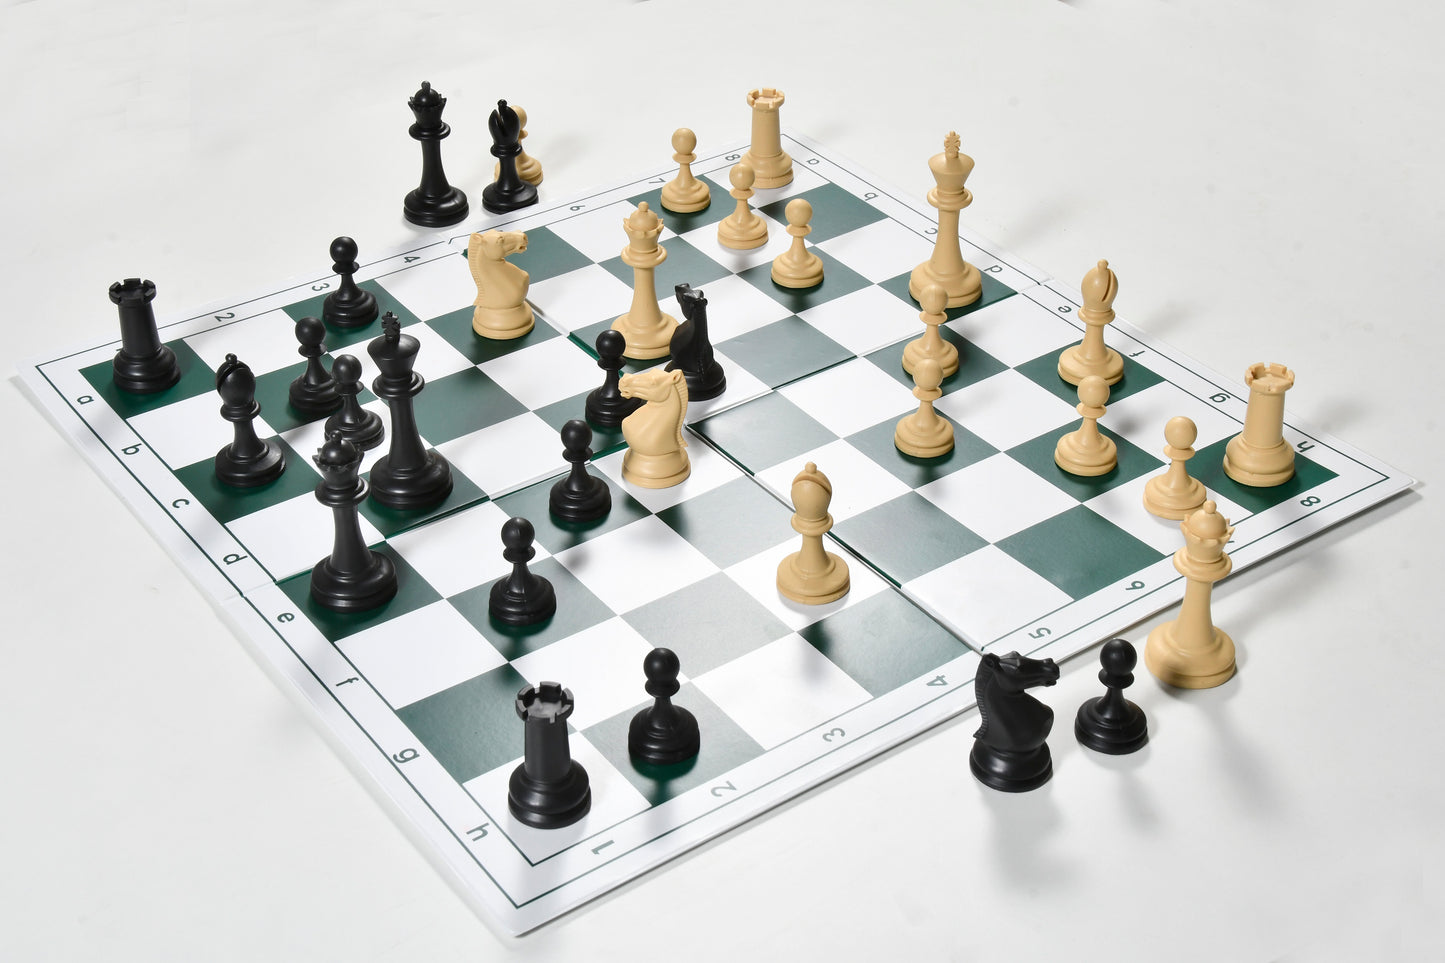 The Blitz Series Plastic Chess Pieces in Black Dyed & Natural White Solid Plastic - 3.8" King